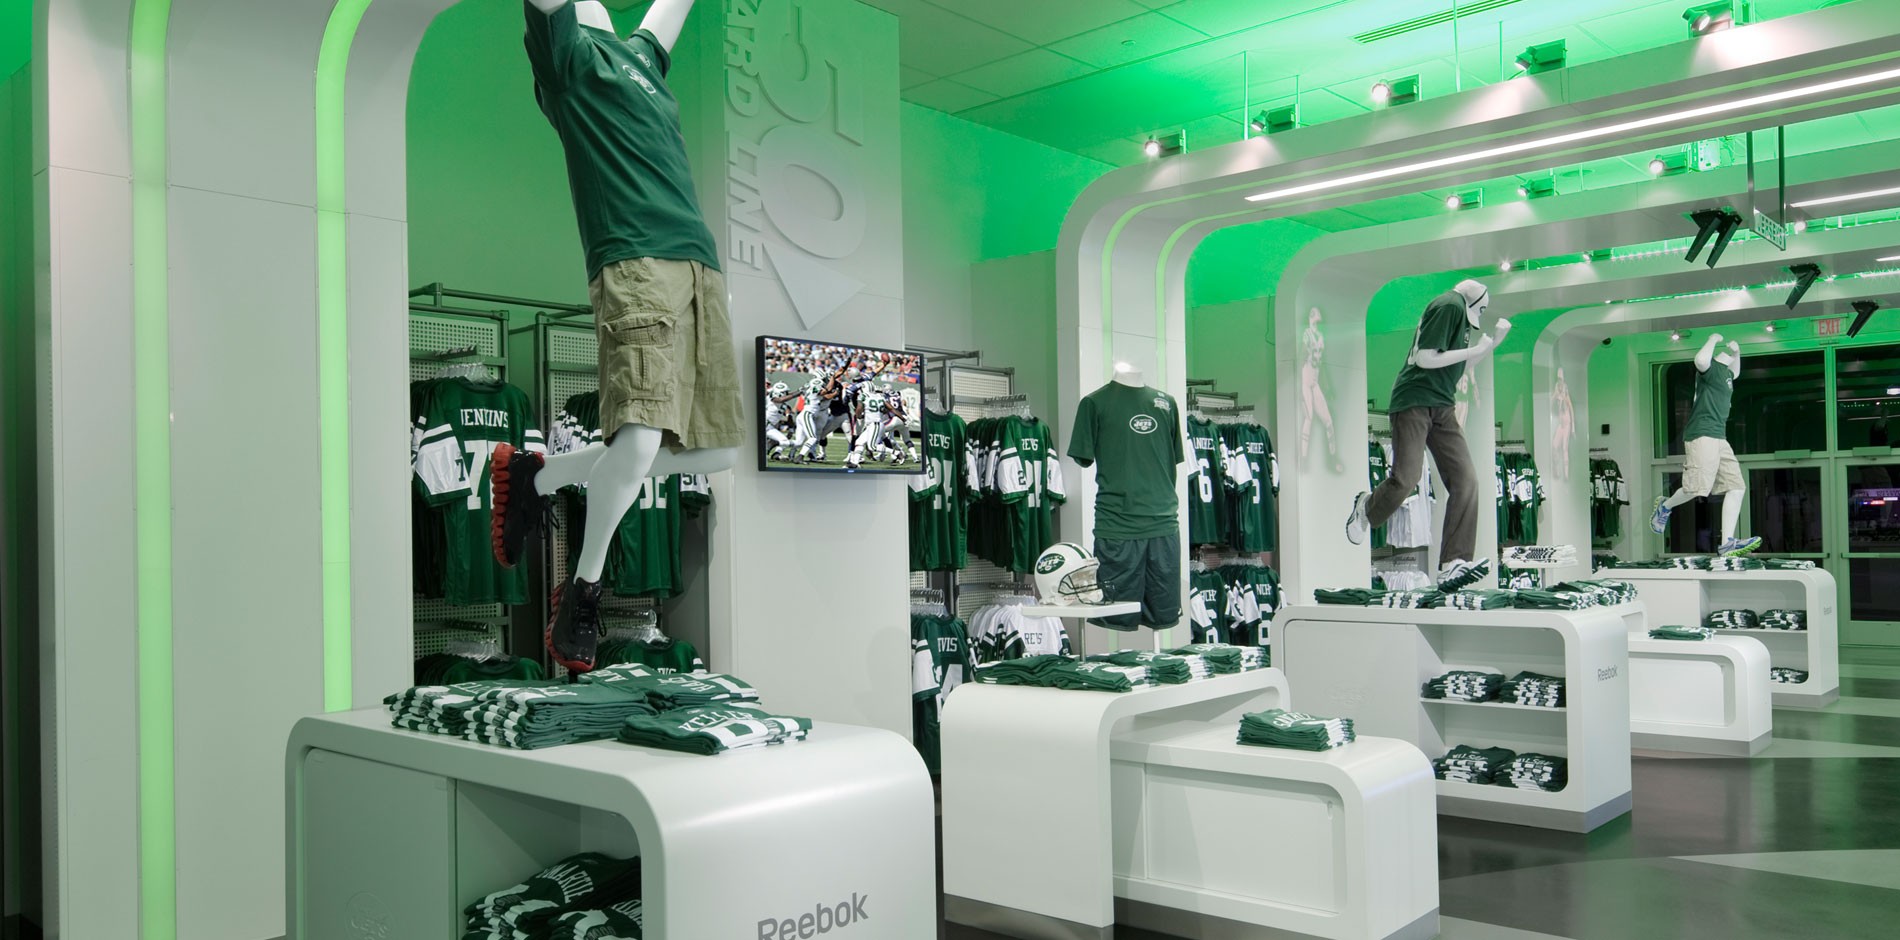 Team Store at the New Meadowlands Stadium